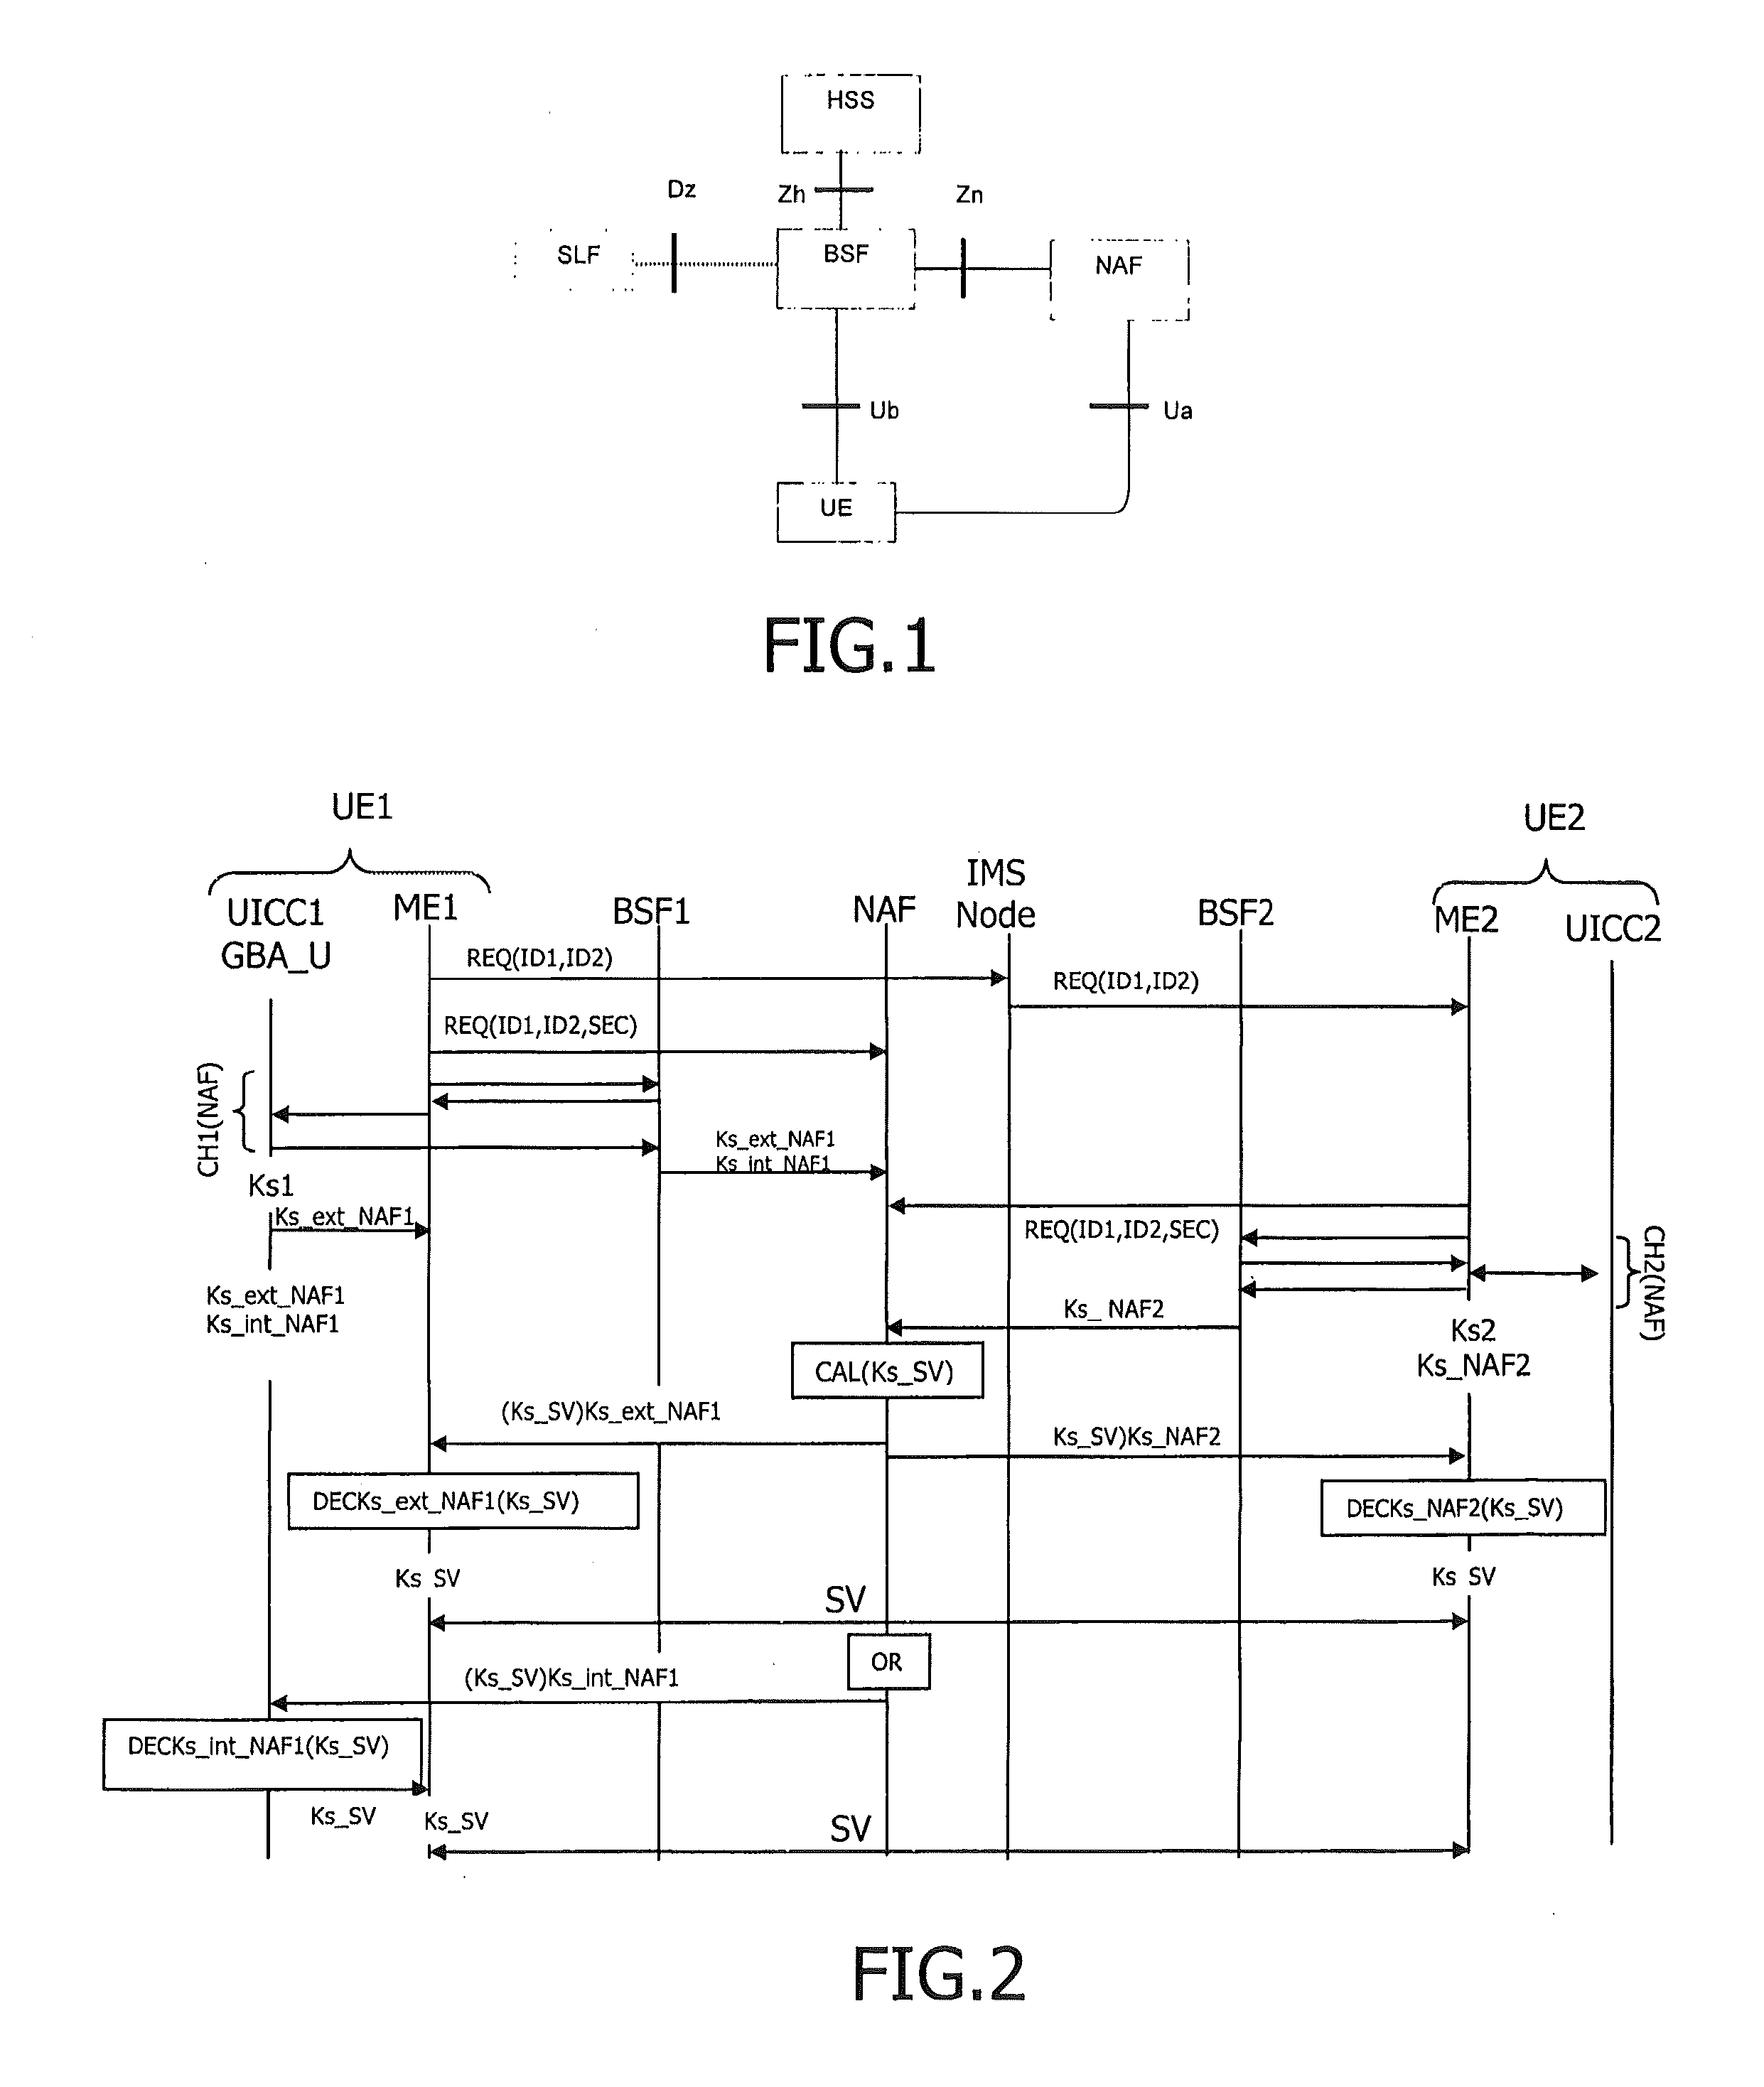 Method to establish a secure voice communication using generic bootstrapping architecture